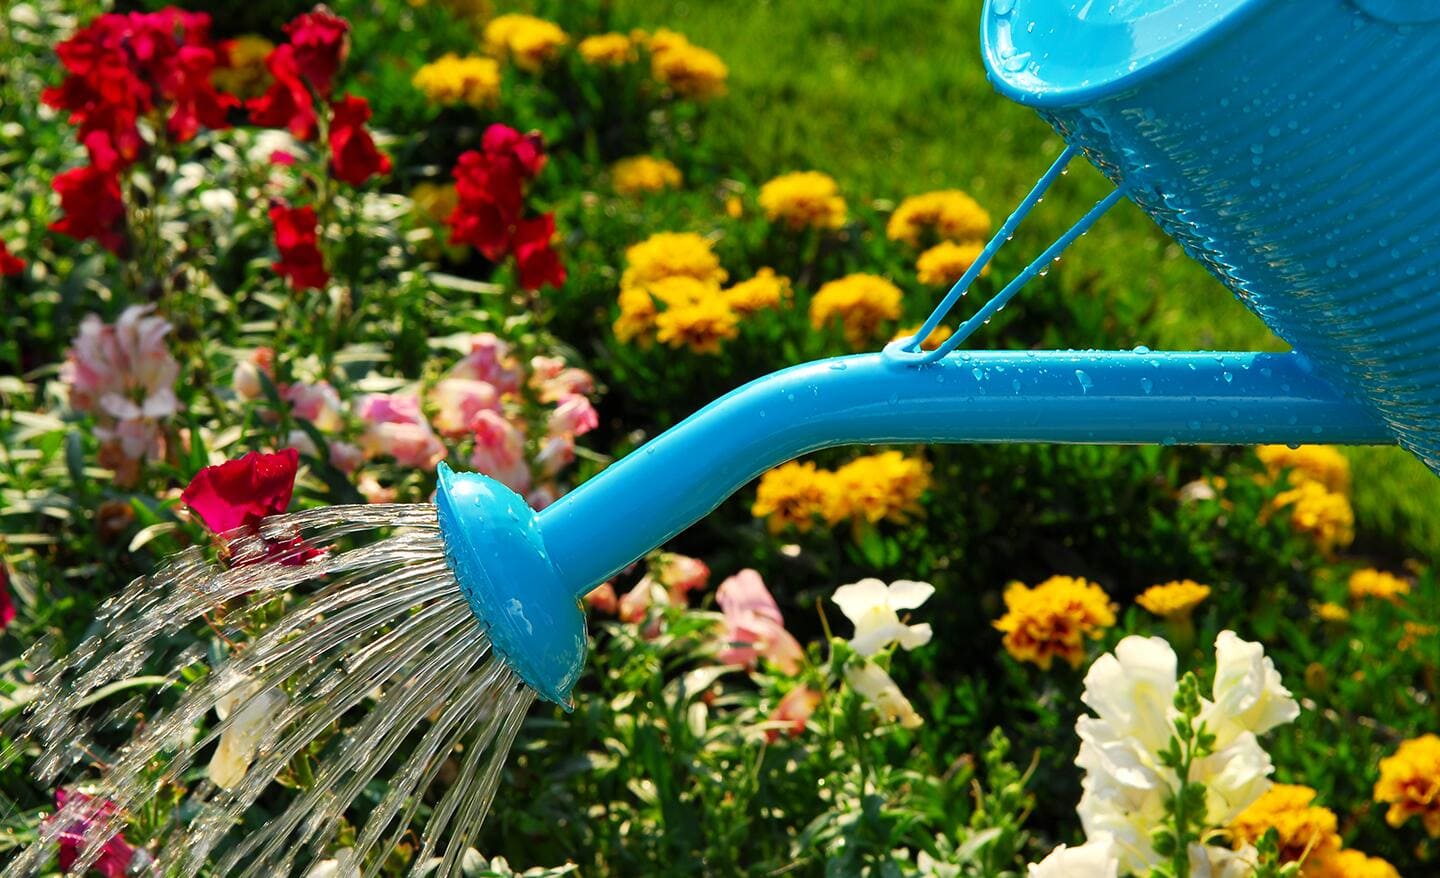 Gardener waters a flower bed with a watering can